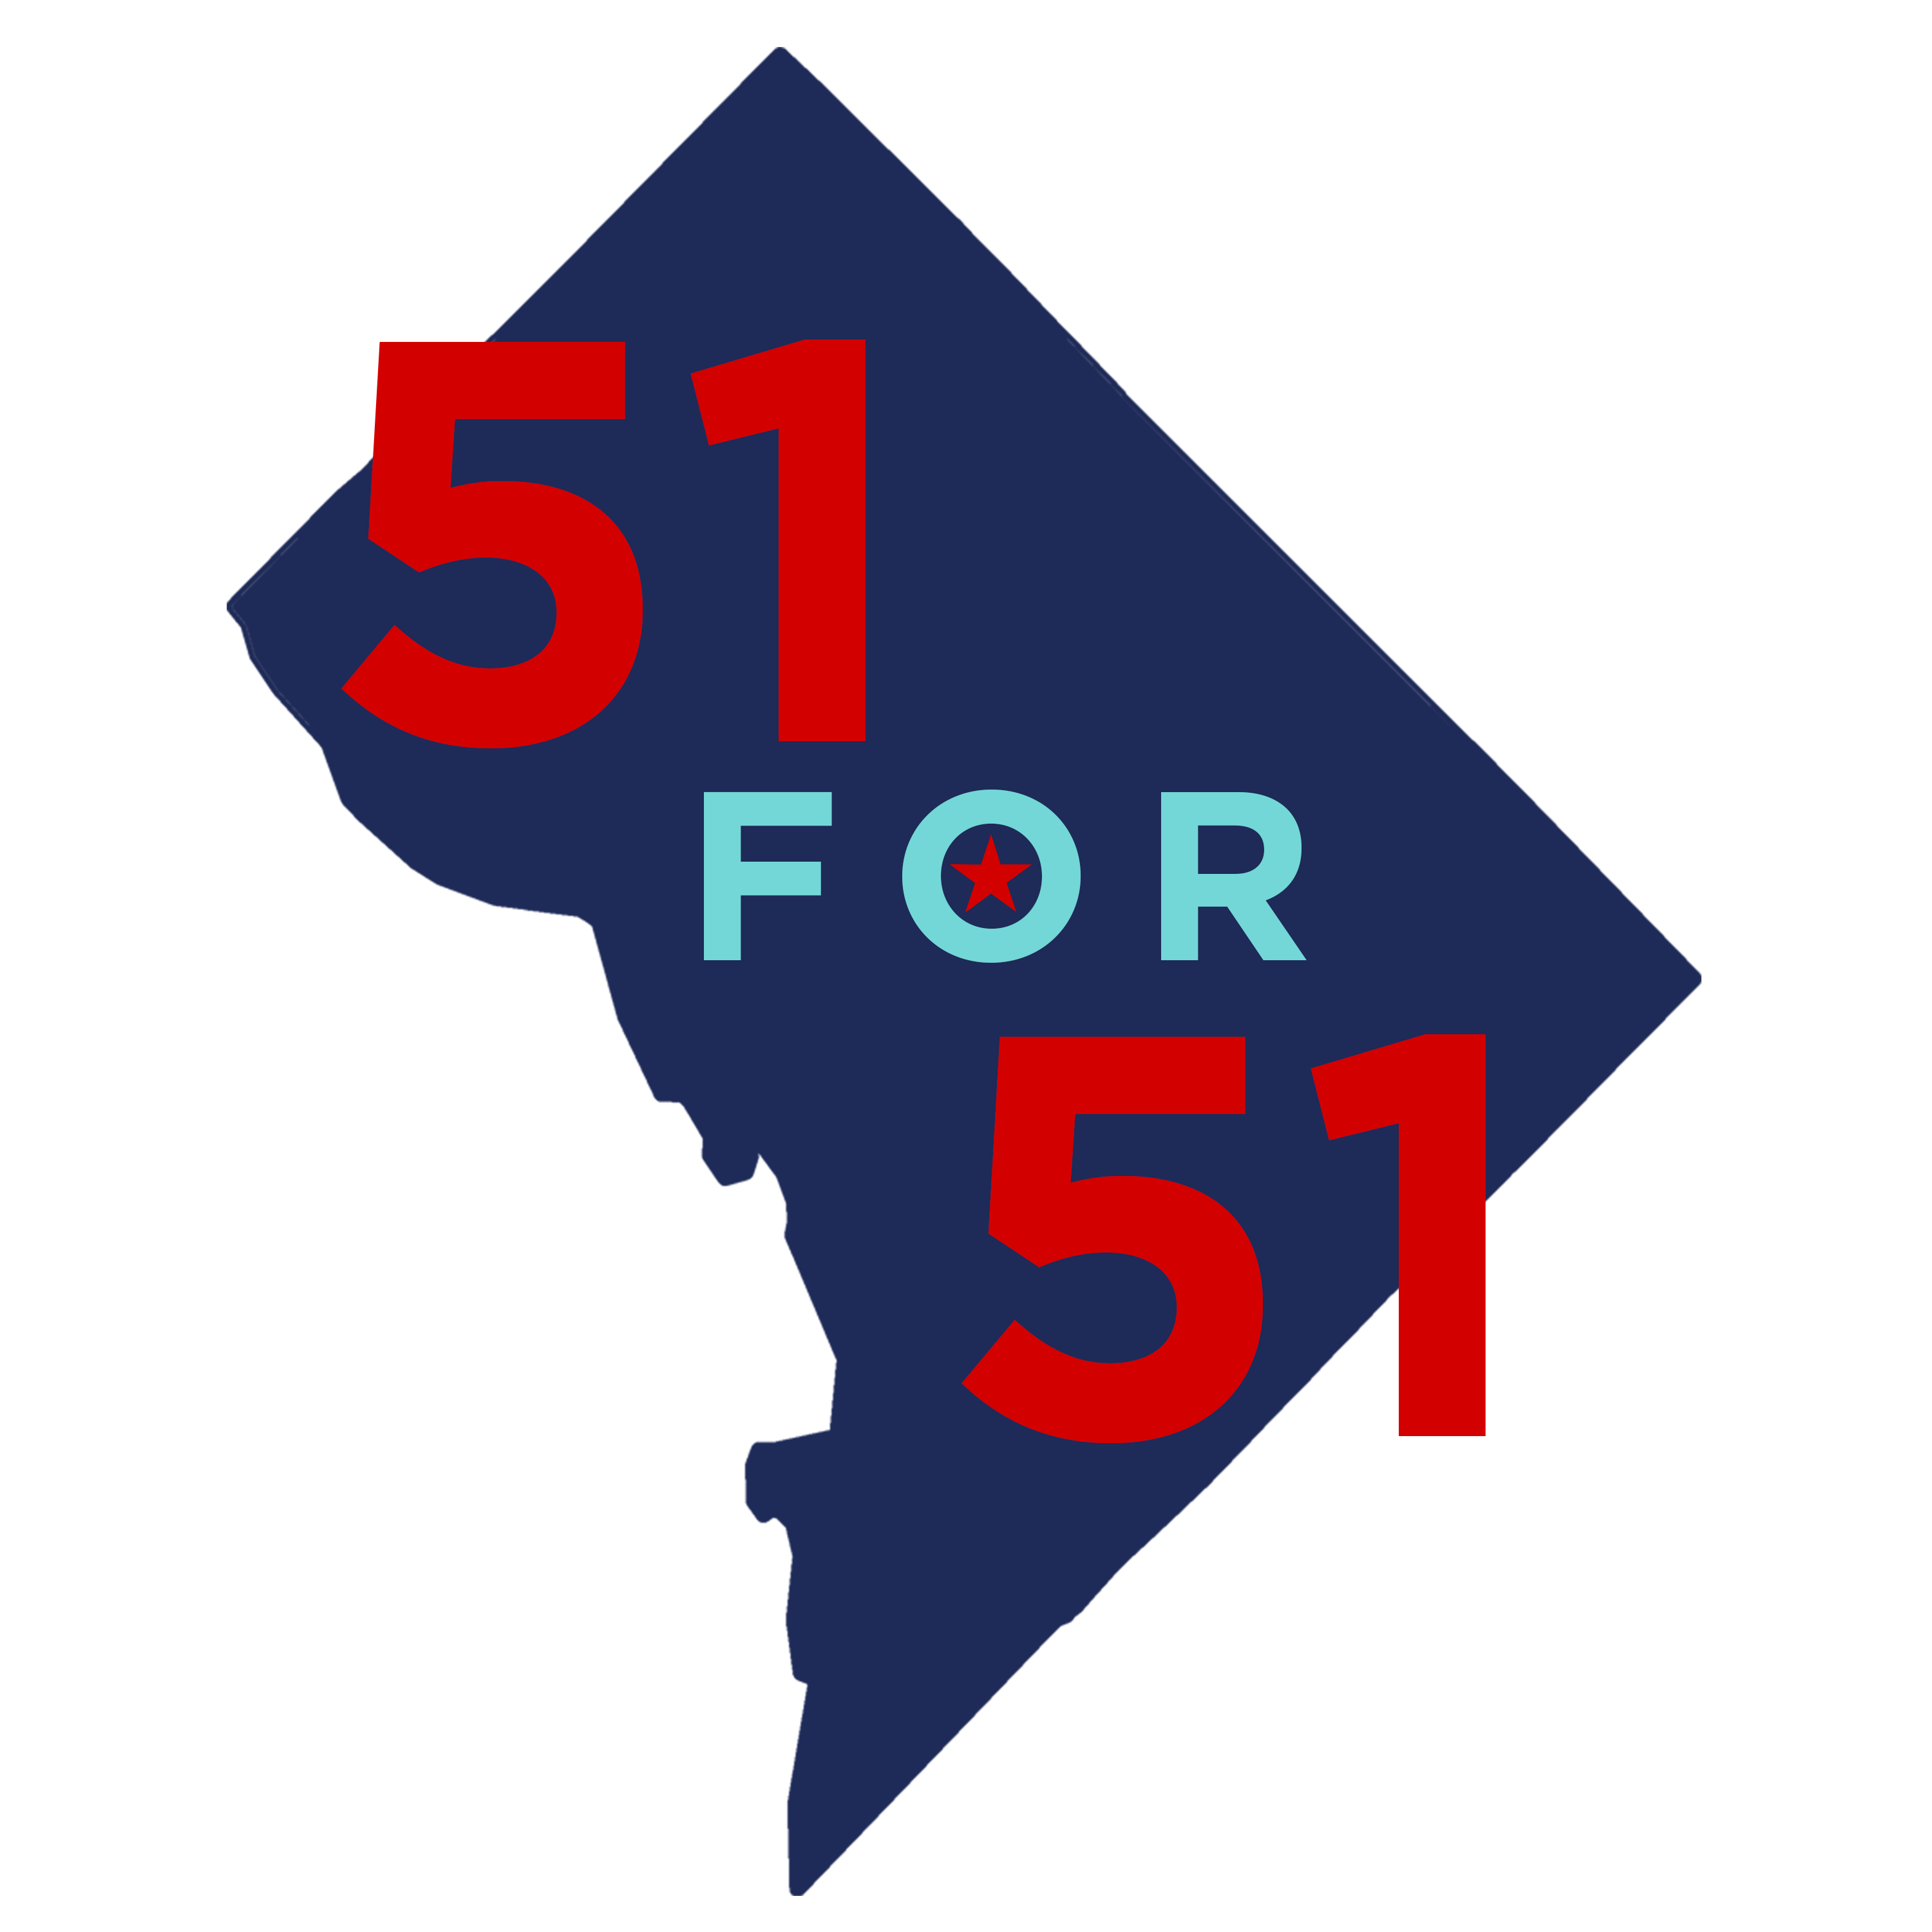 51 for 51_Final Logo.png